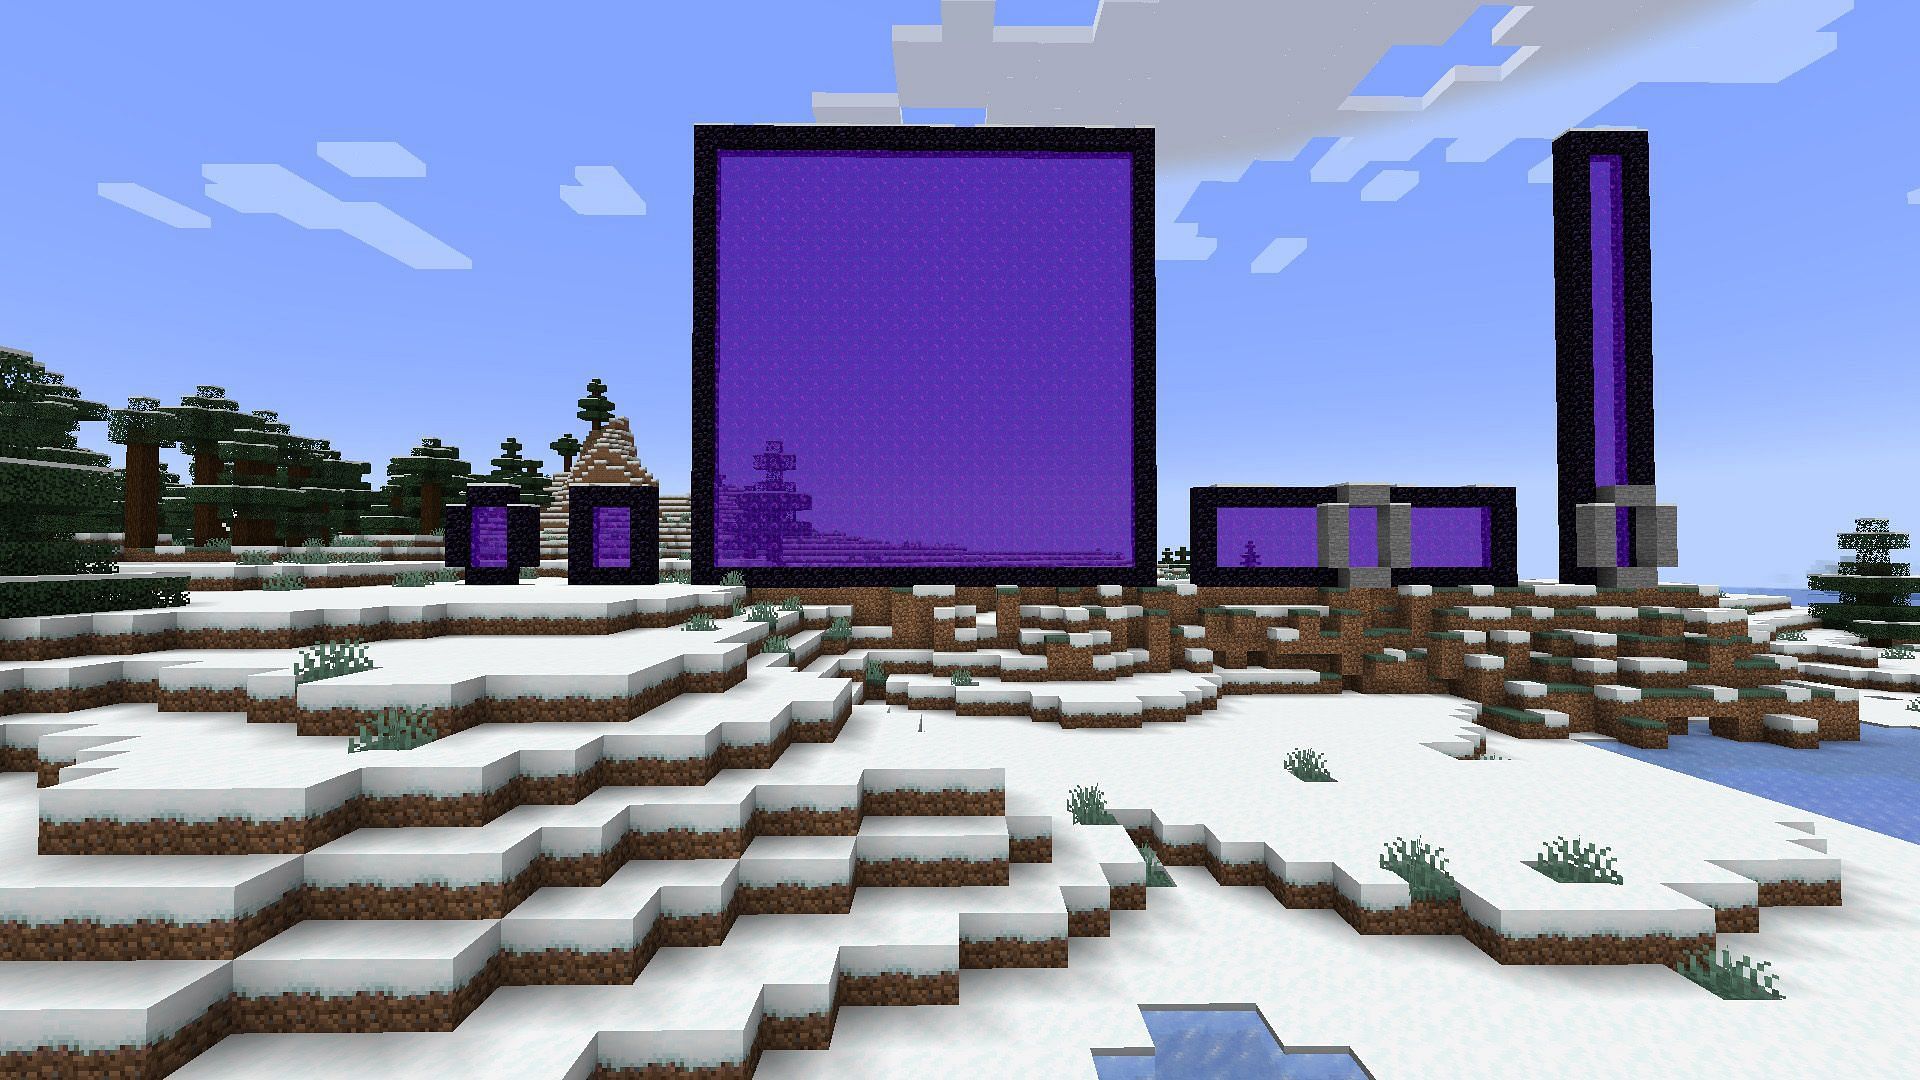 using nether portals to travel